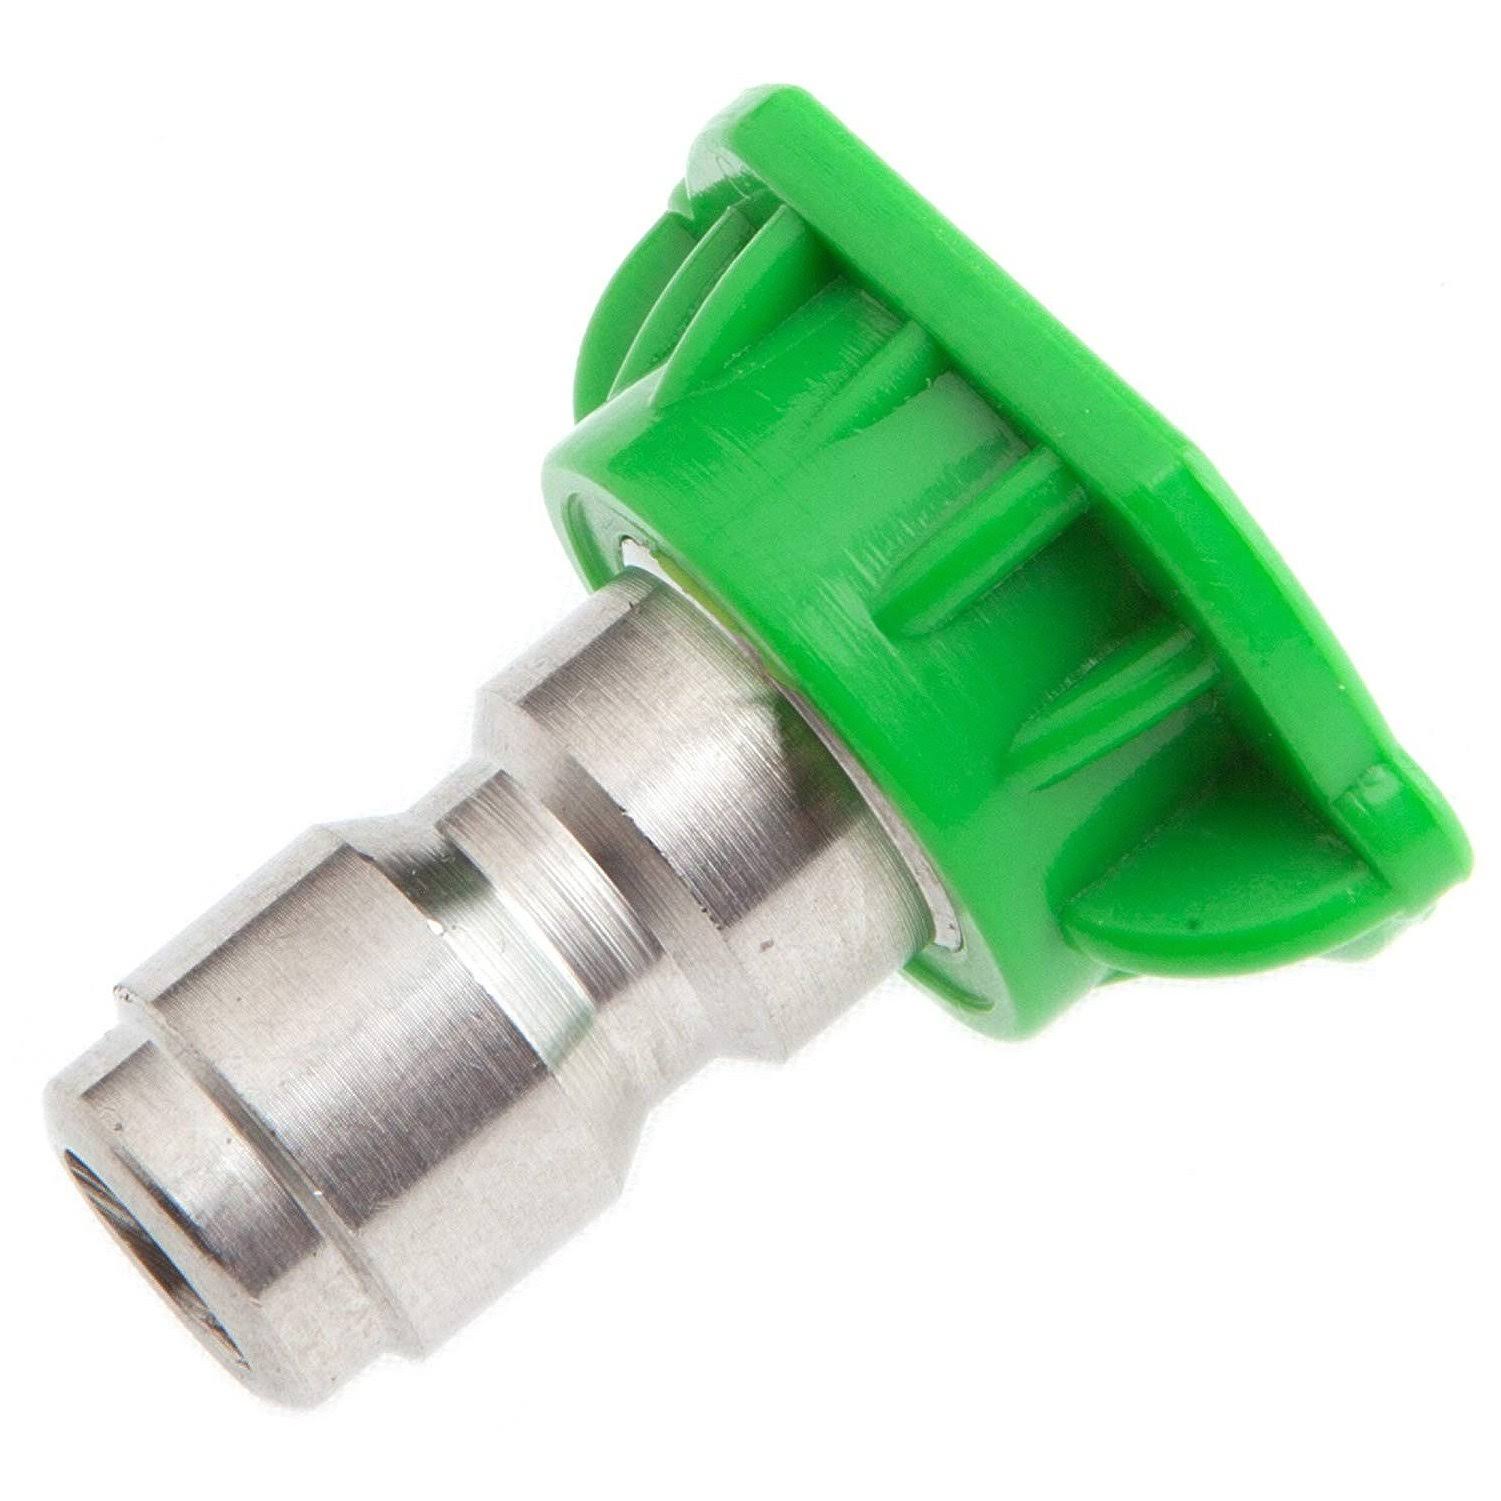 Forney 75155 Quick Connect Flushing Nozzle - Green, 25 Degree x 4.5m